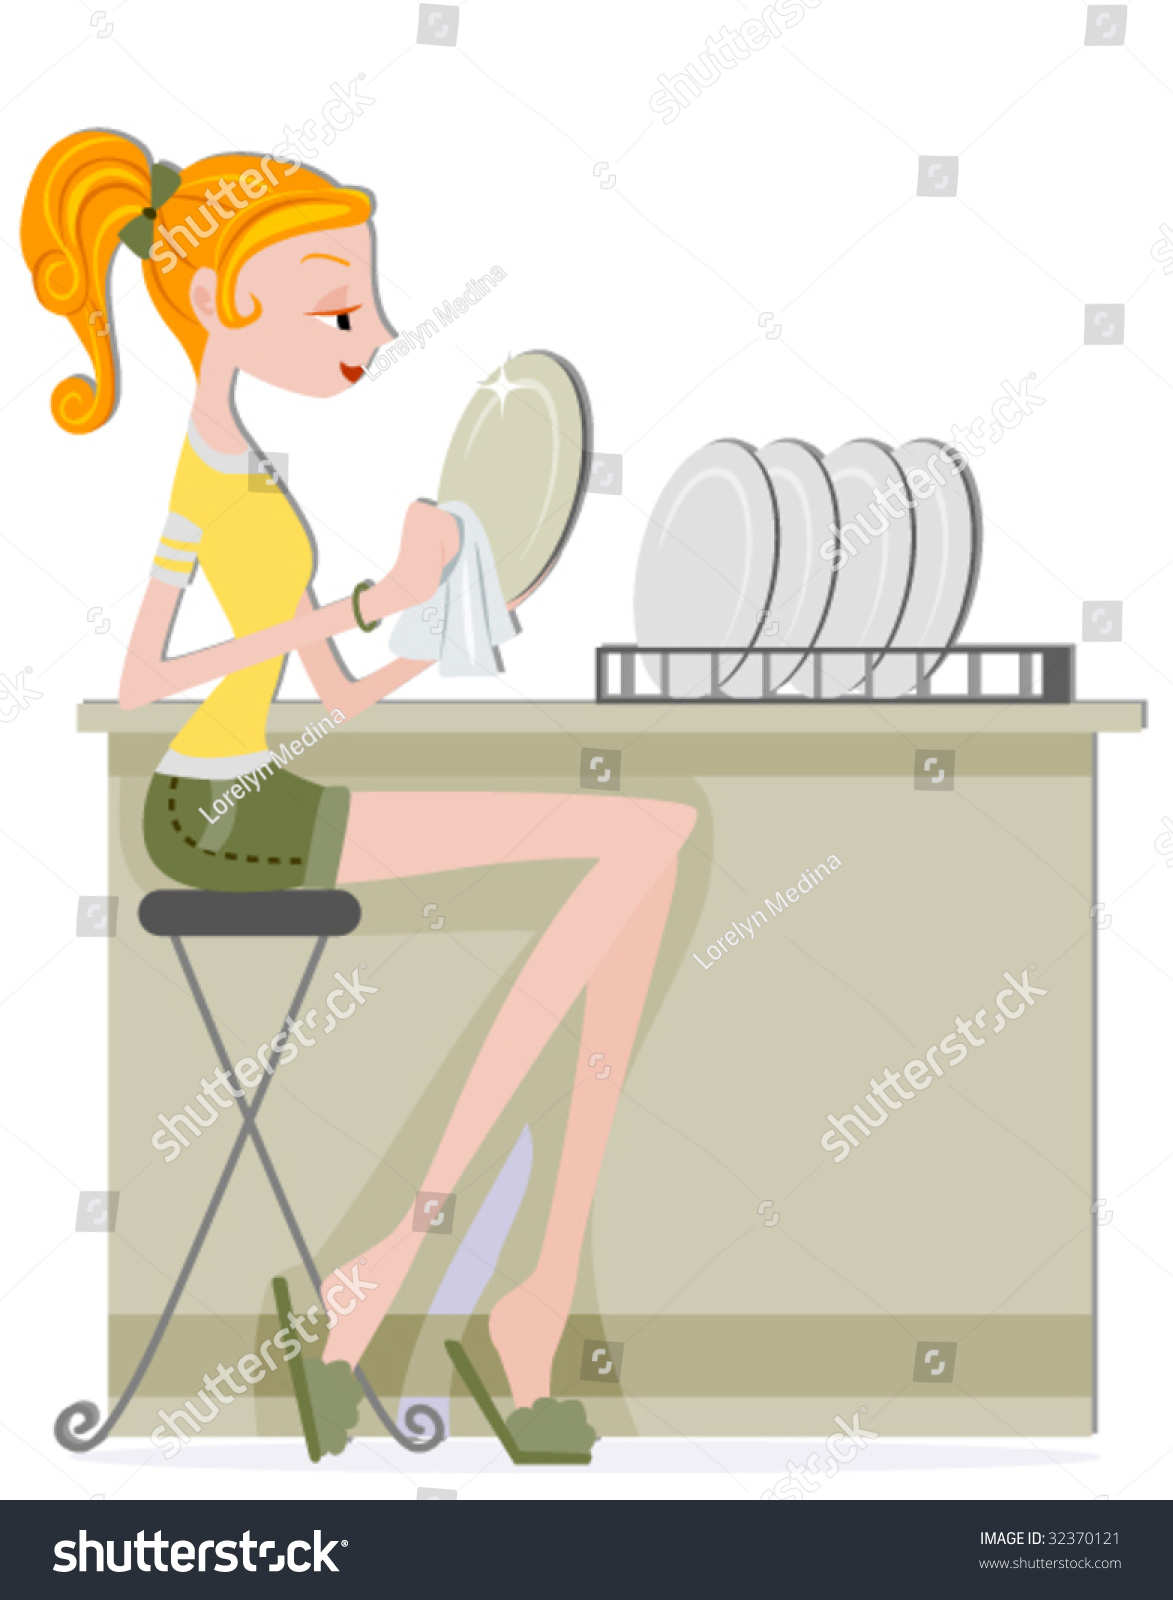 Dry the dishes picture for Kids. Clean Plates picture cartoon. Washing dishes advertising poster PNG. She the dishes already